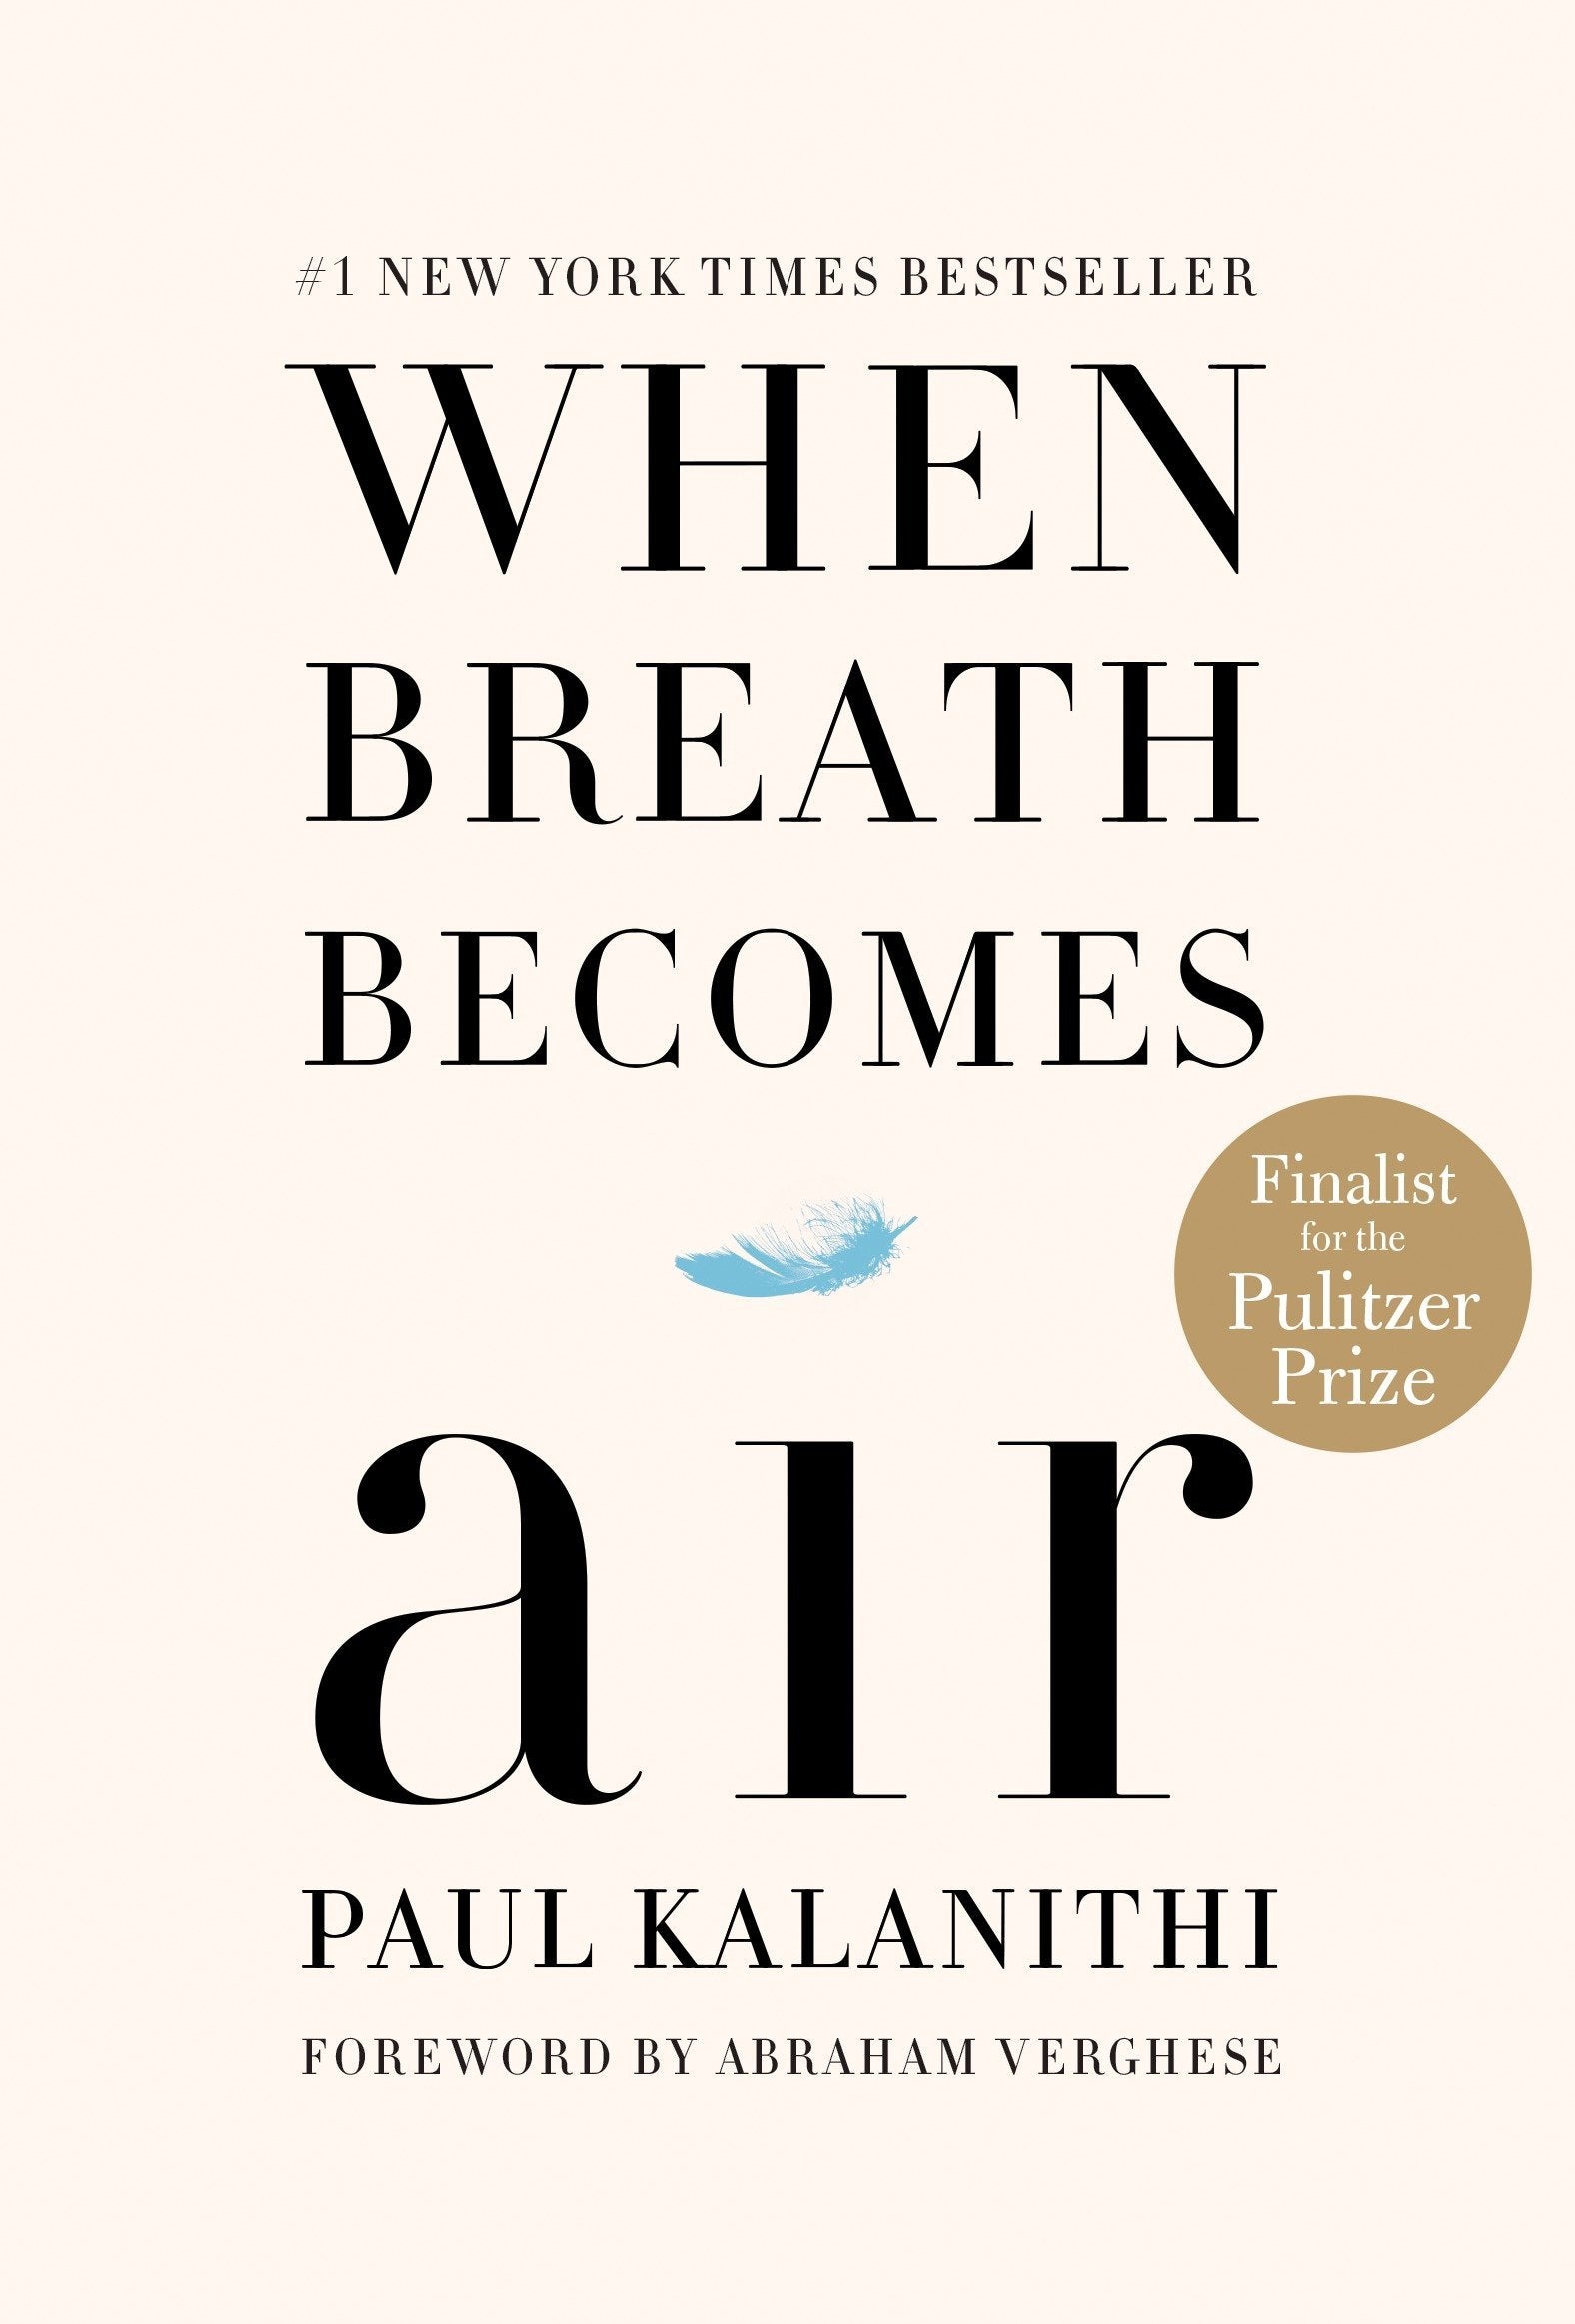 Image of cover of When Breathe Becomes Air (Random House, 2016) by Paul Kalanithi